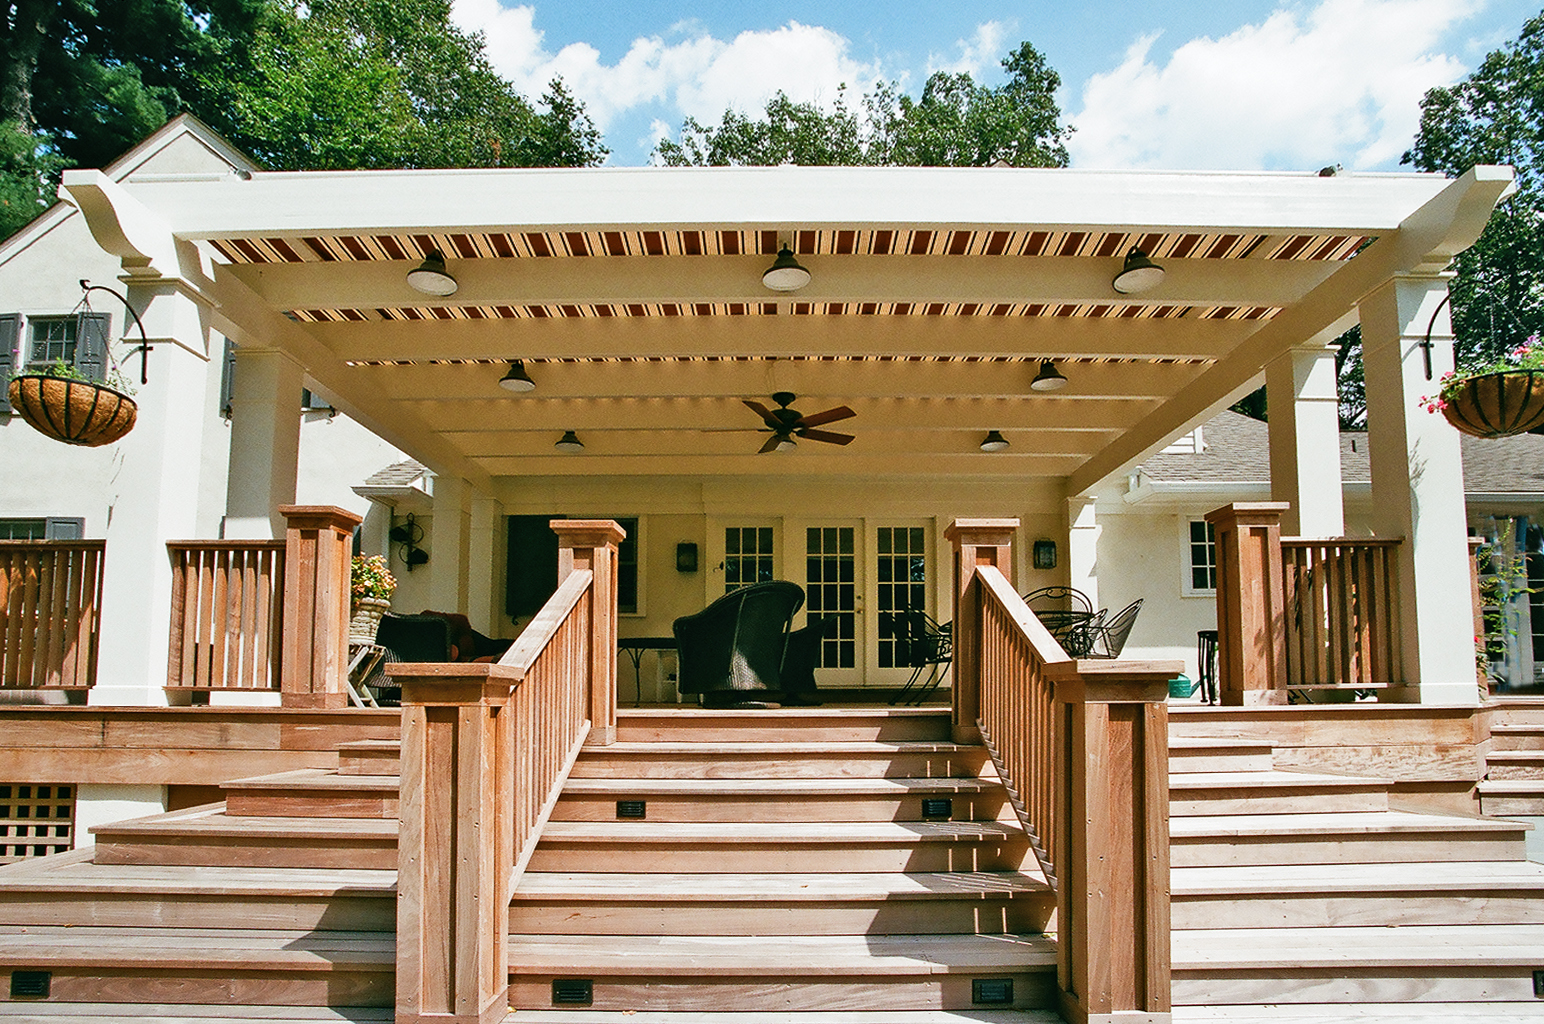  The pergola has a retractable canopy on it to provide shade from the summer sun. 